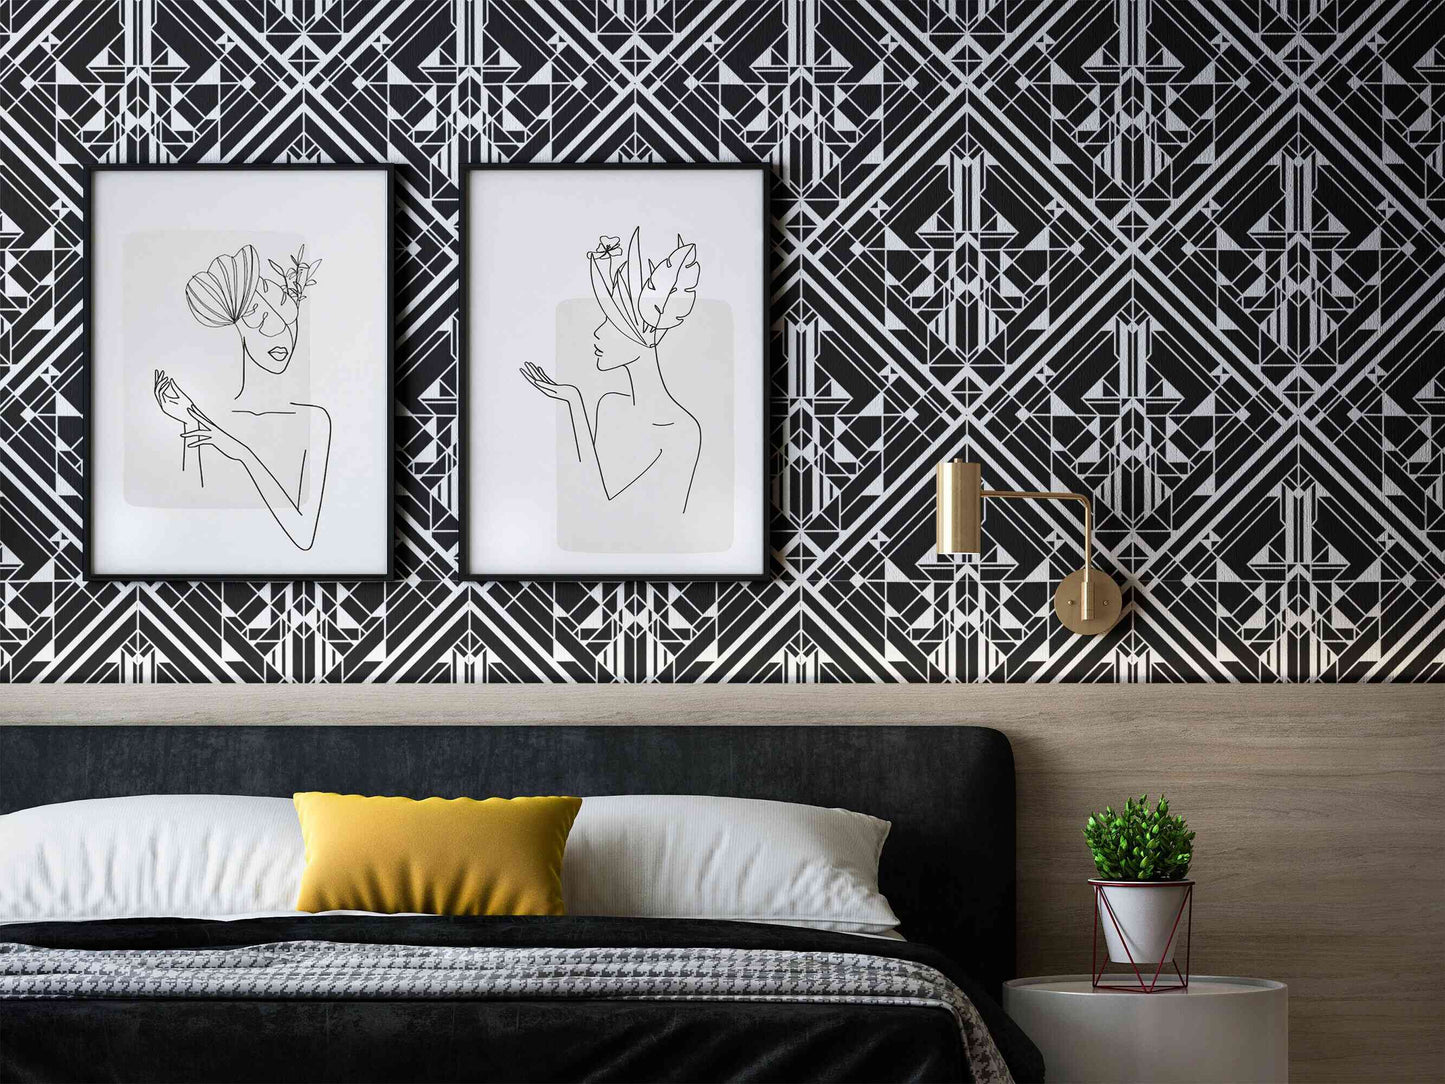 Contrast pattern luxury wallpaper in black and white, adding a sophisticated touch to any space.